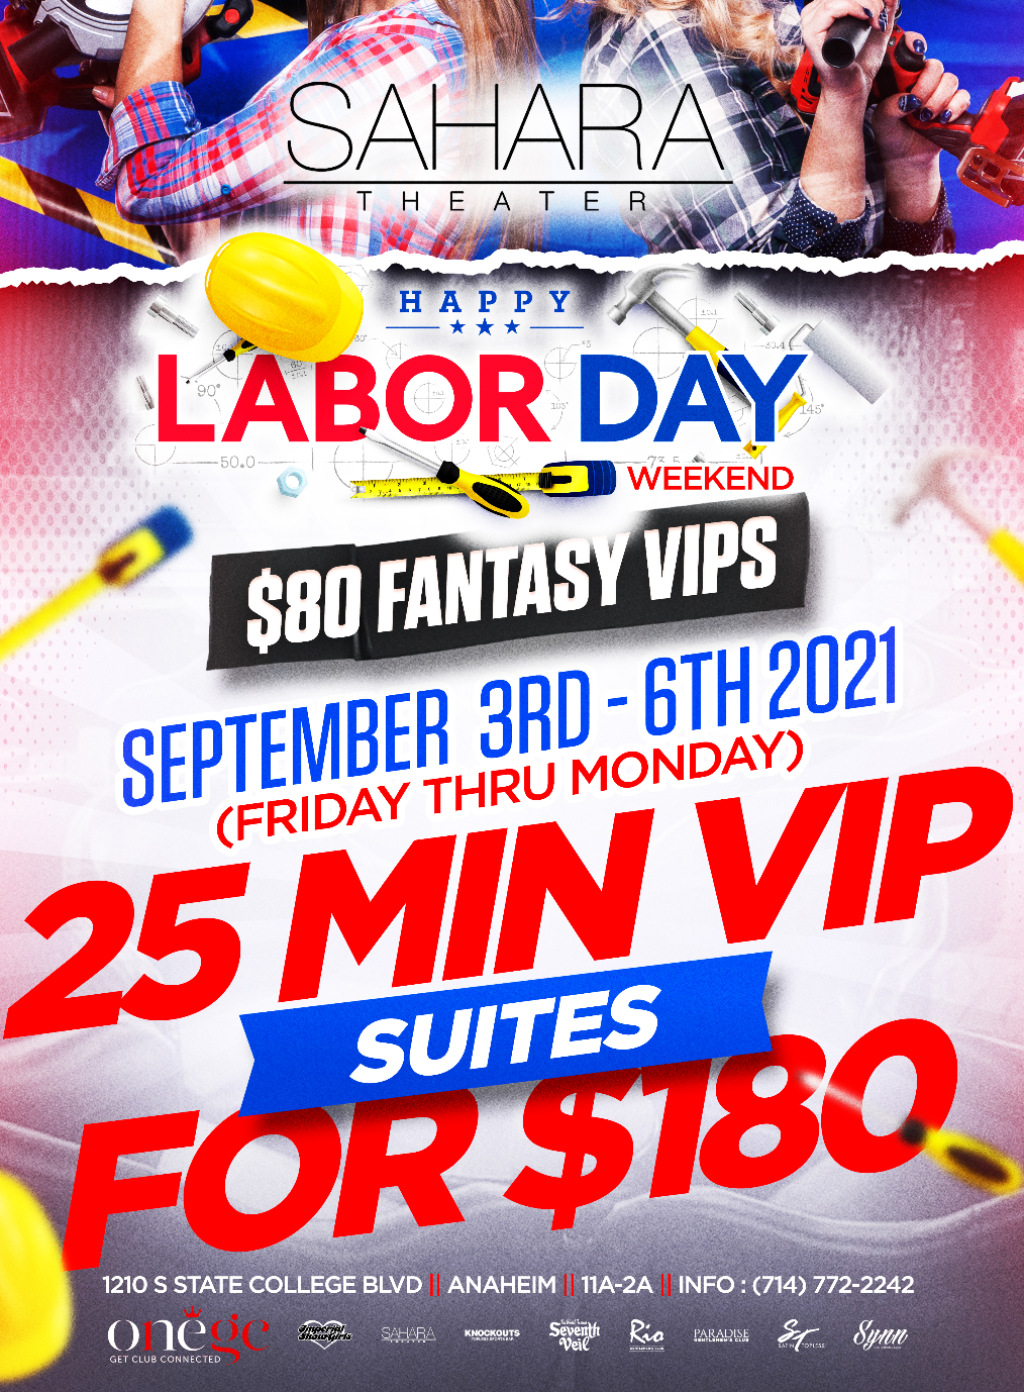 LABOR DAY WEEKEND SPECIAL